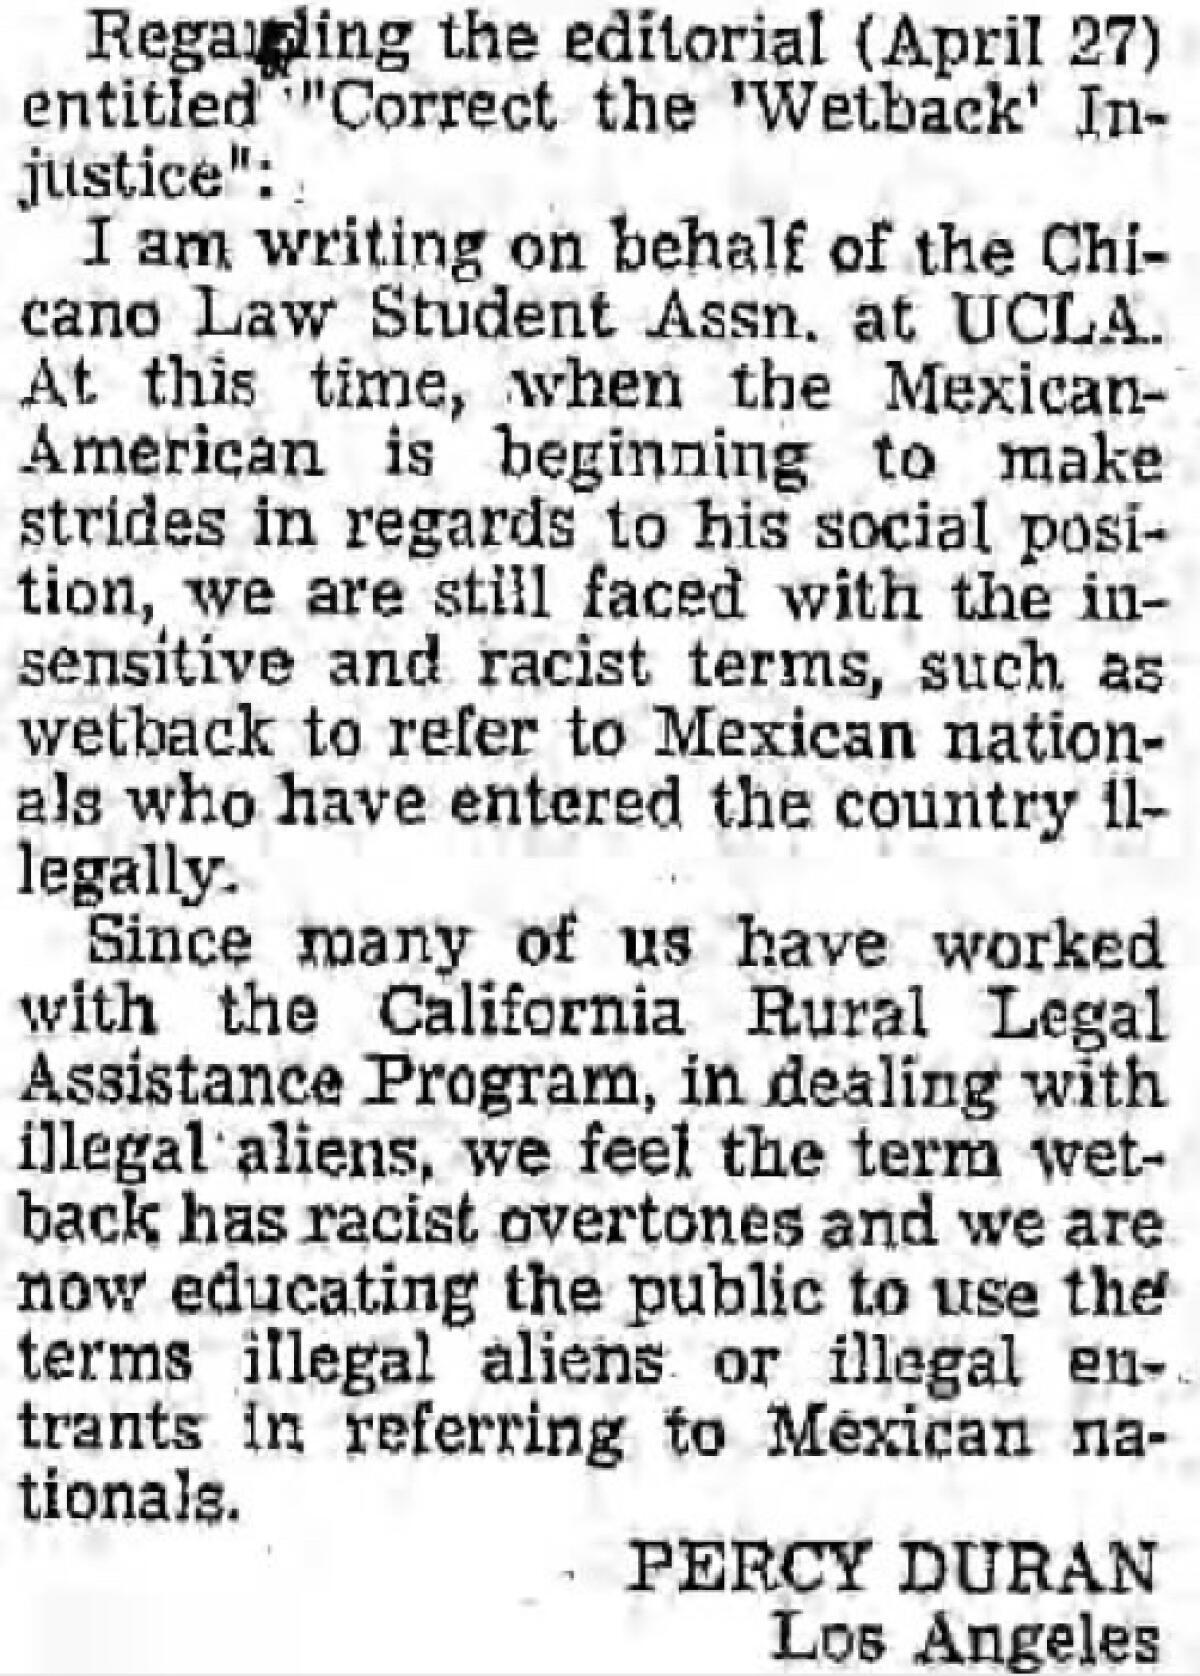 A  1970 letter to the Los Angeles Times by a Chicano student asking the paper use "illegal aliens" instead of "wetback"